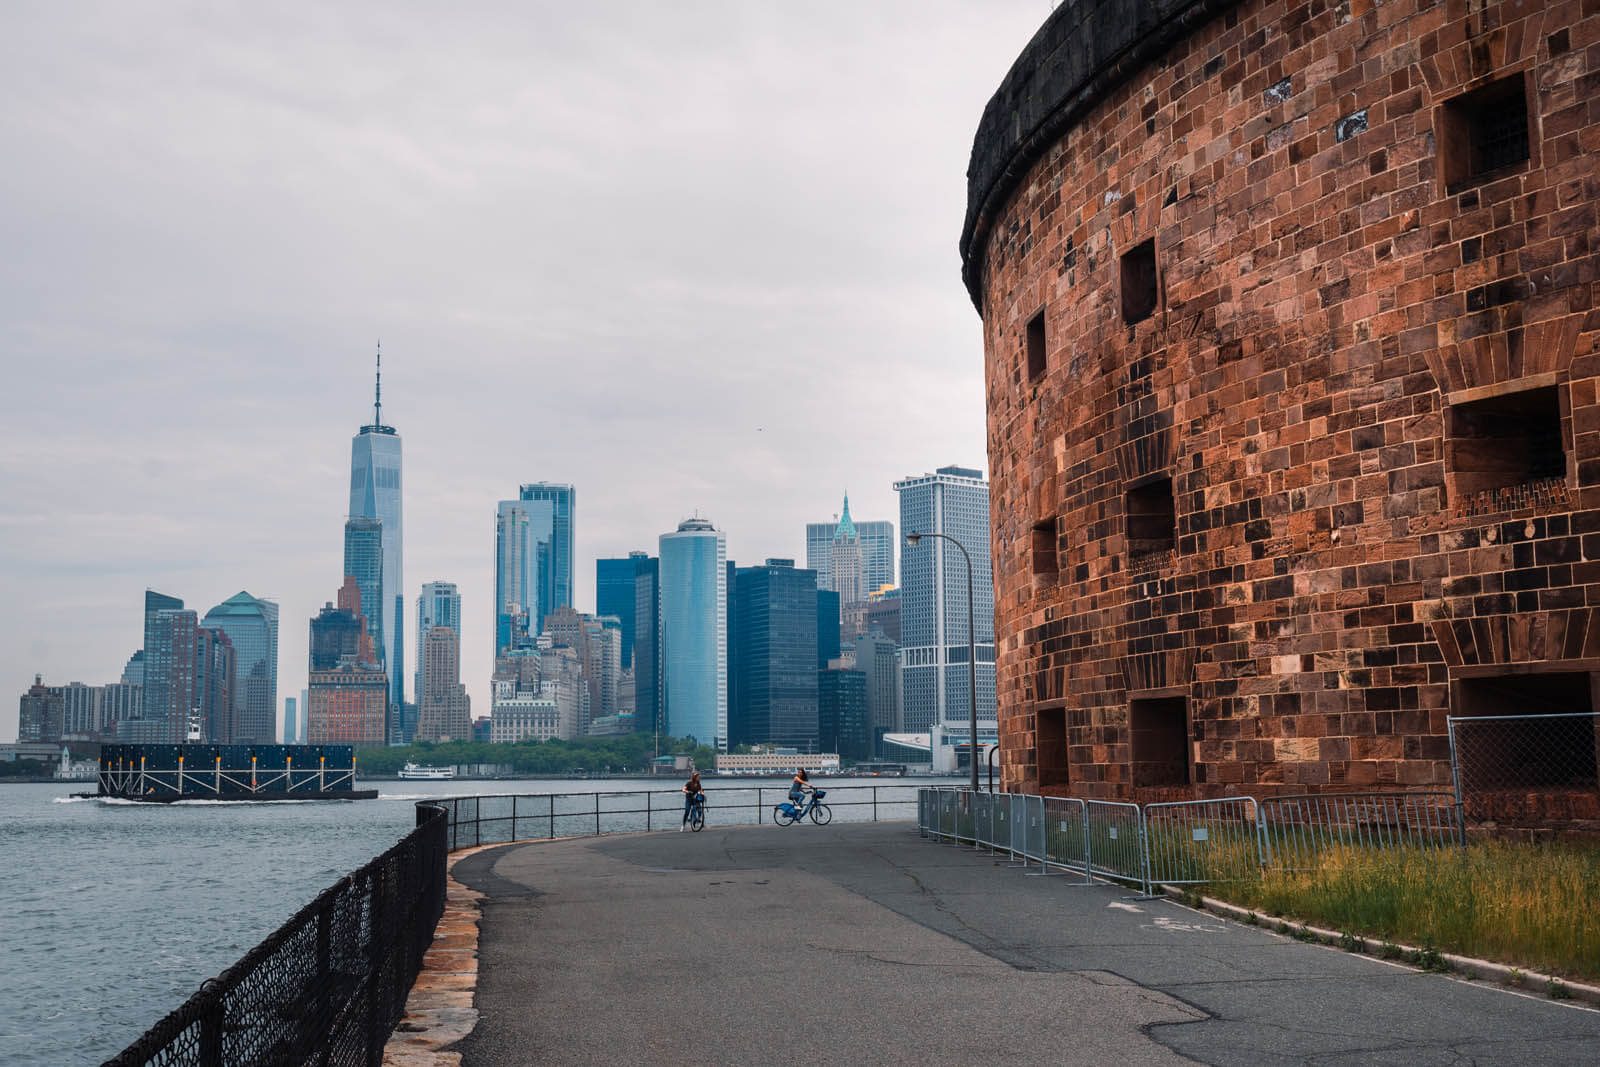 Castle Williams on Governors Island with a view of the World Trade Center in NYC